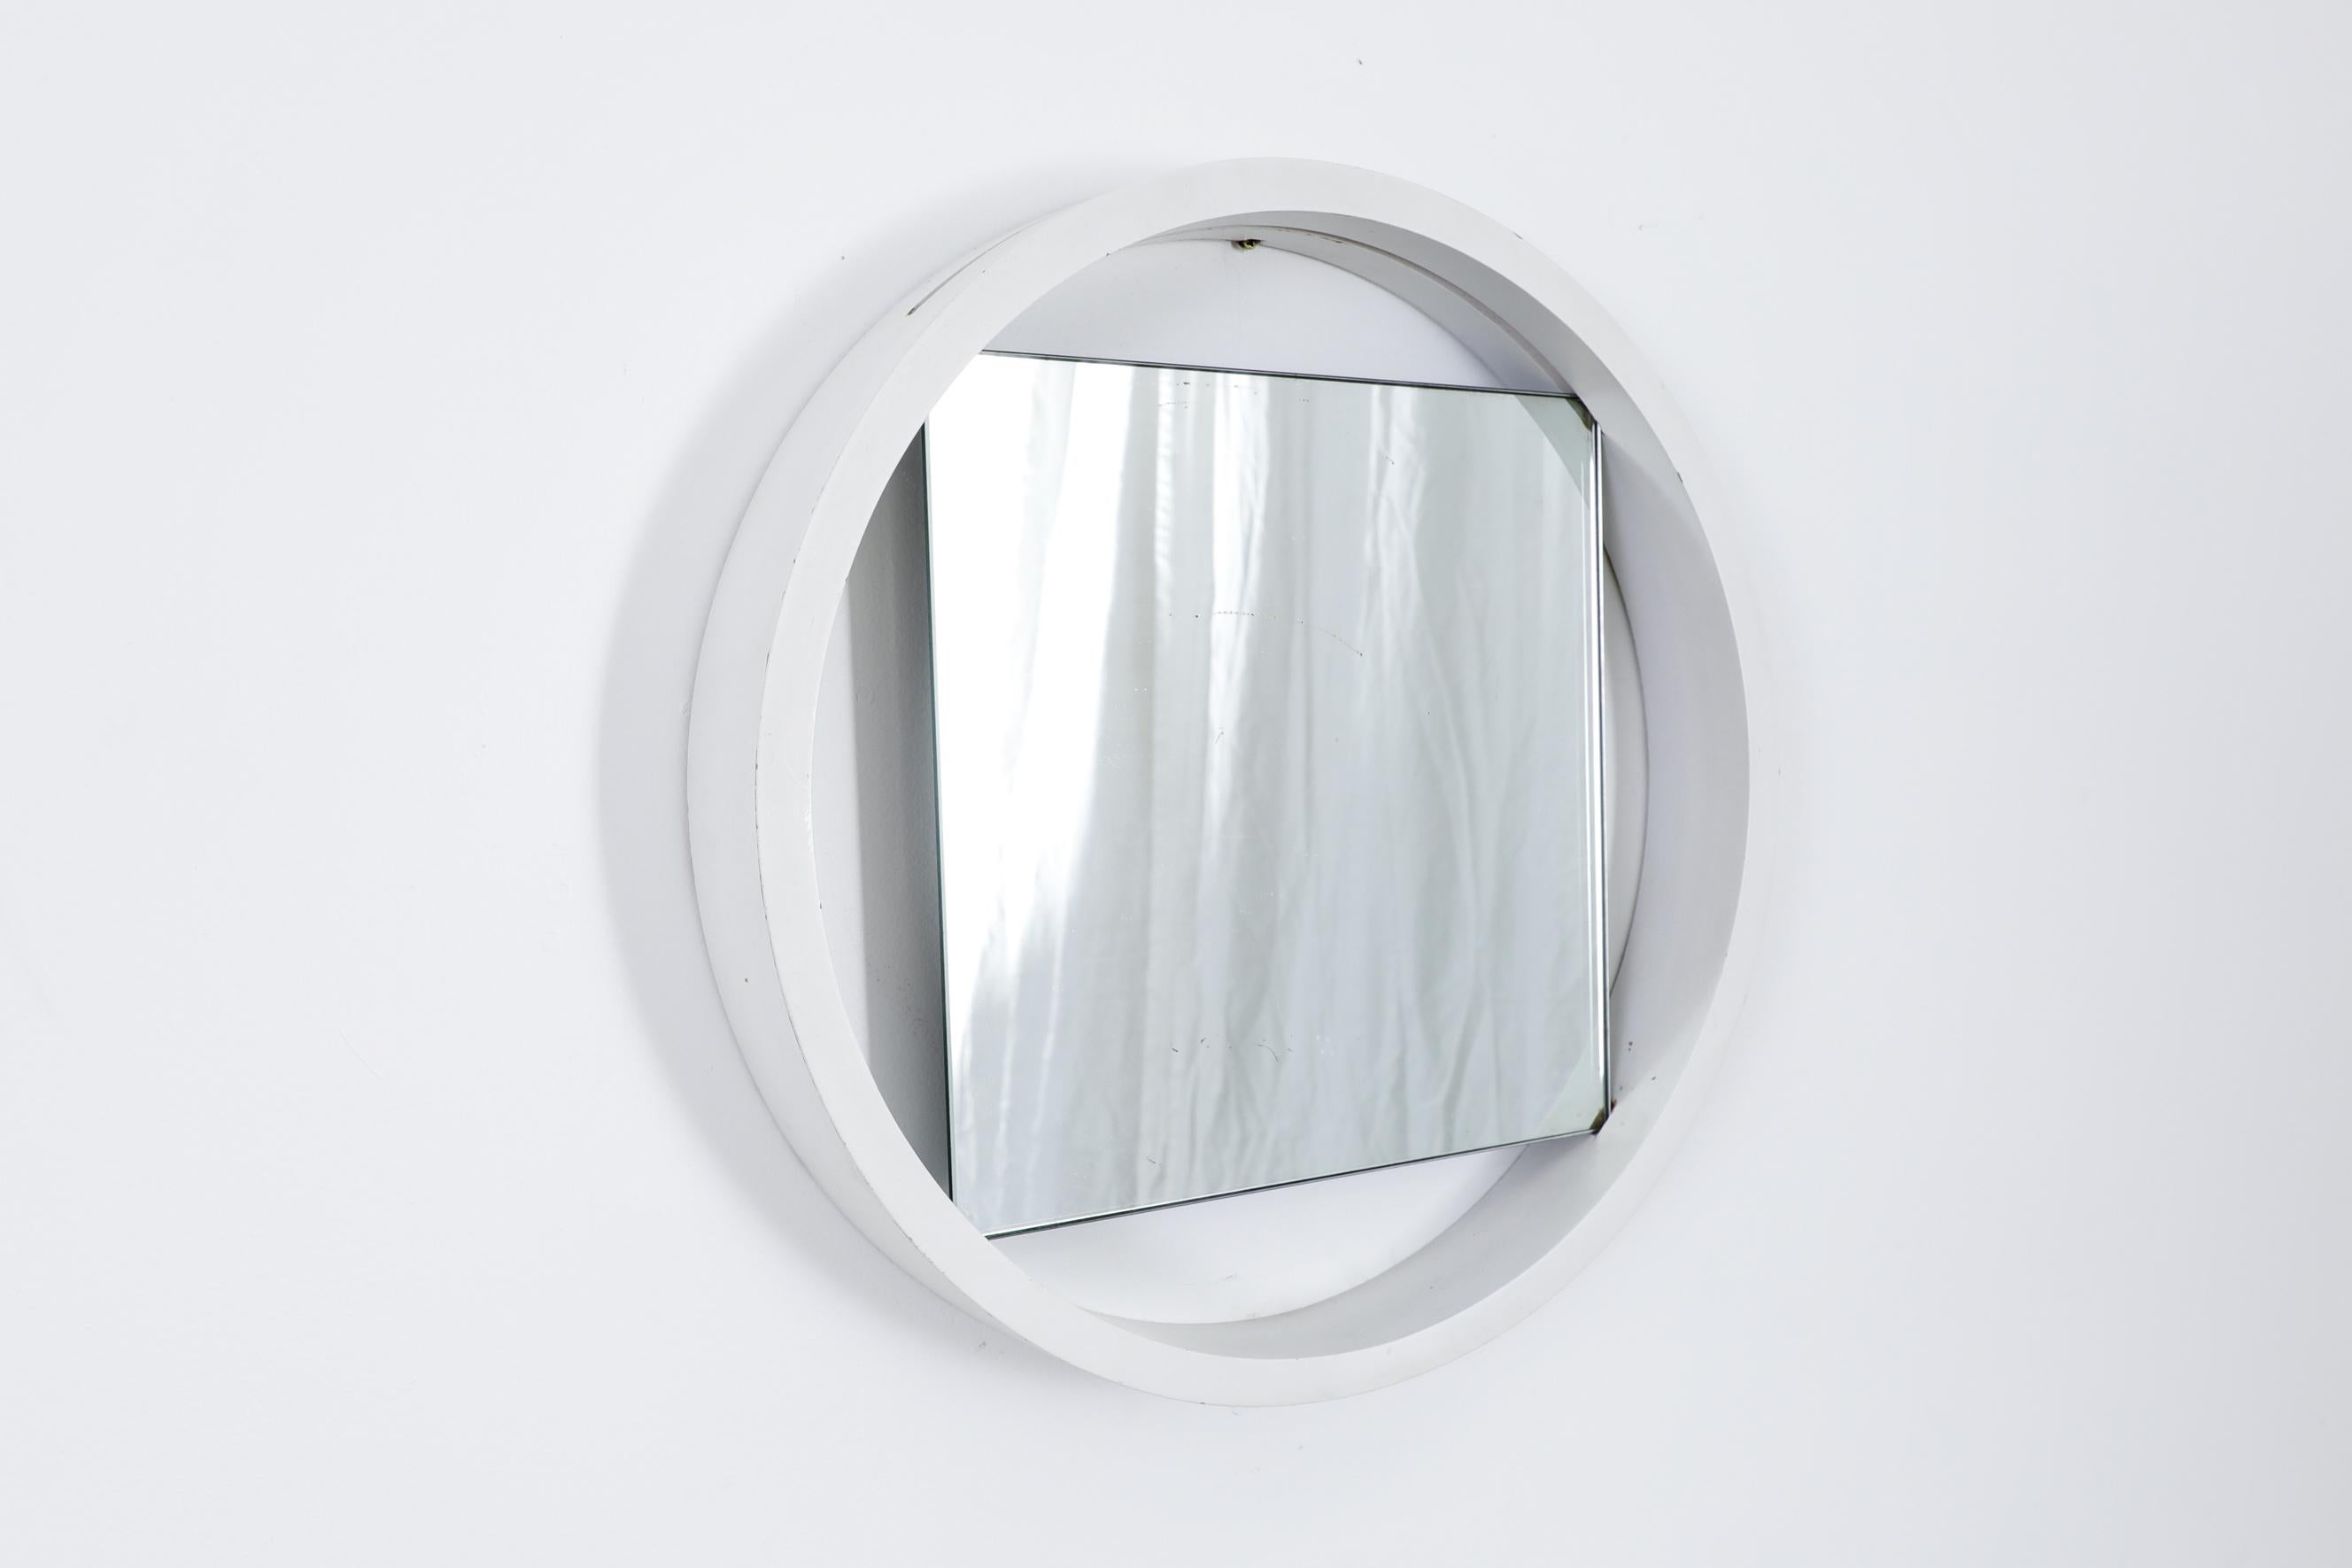 Model DZ84 mirror by Benno Premsela for 't Spectrum, 1950's. The model was in the Spectrum collection from 1964-1971. The mirror has a white lacquered frame and a square mirror that slides into the frame. The mirror without the frame measures